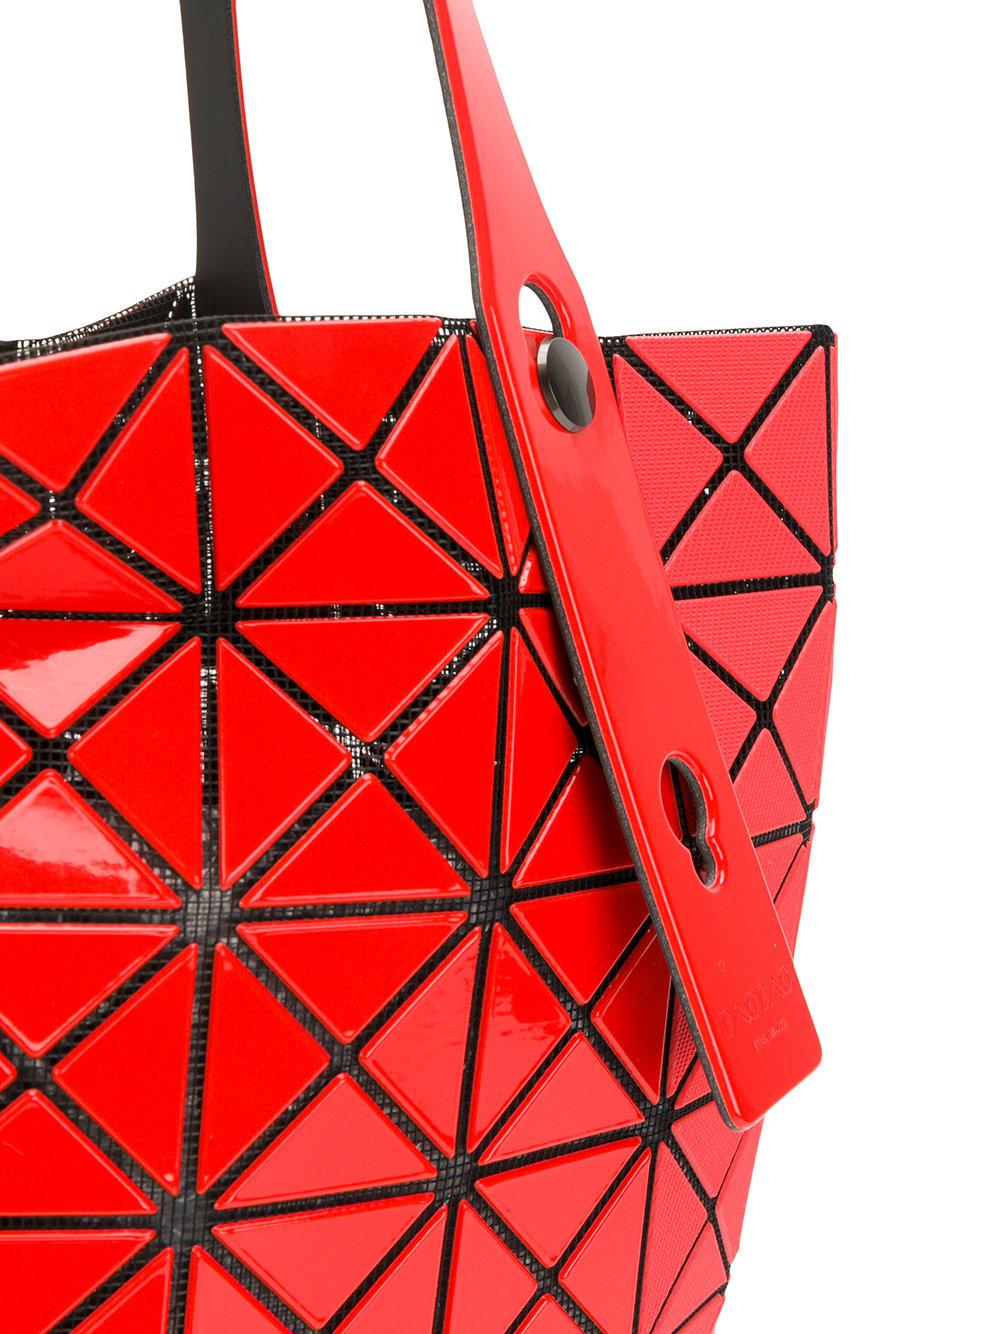 Bao Bao Issey Miyake Synthetic Scarlett Tote in Red - Lyst